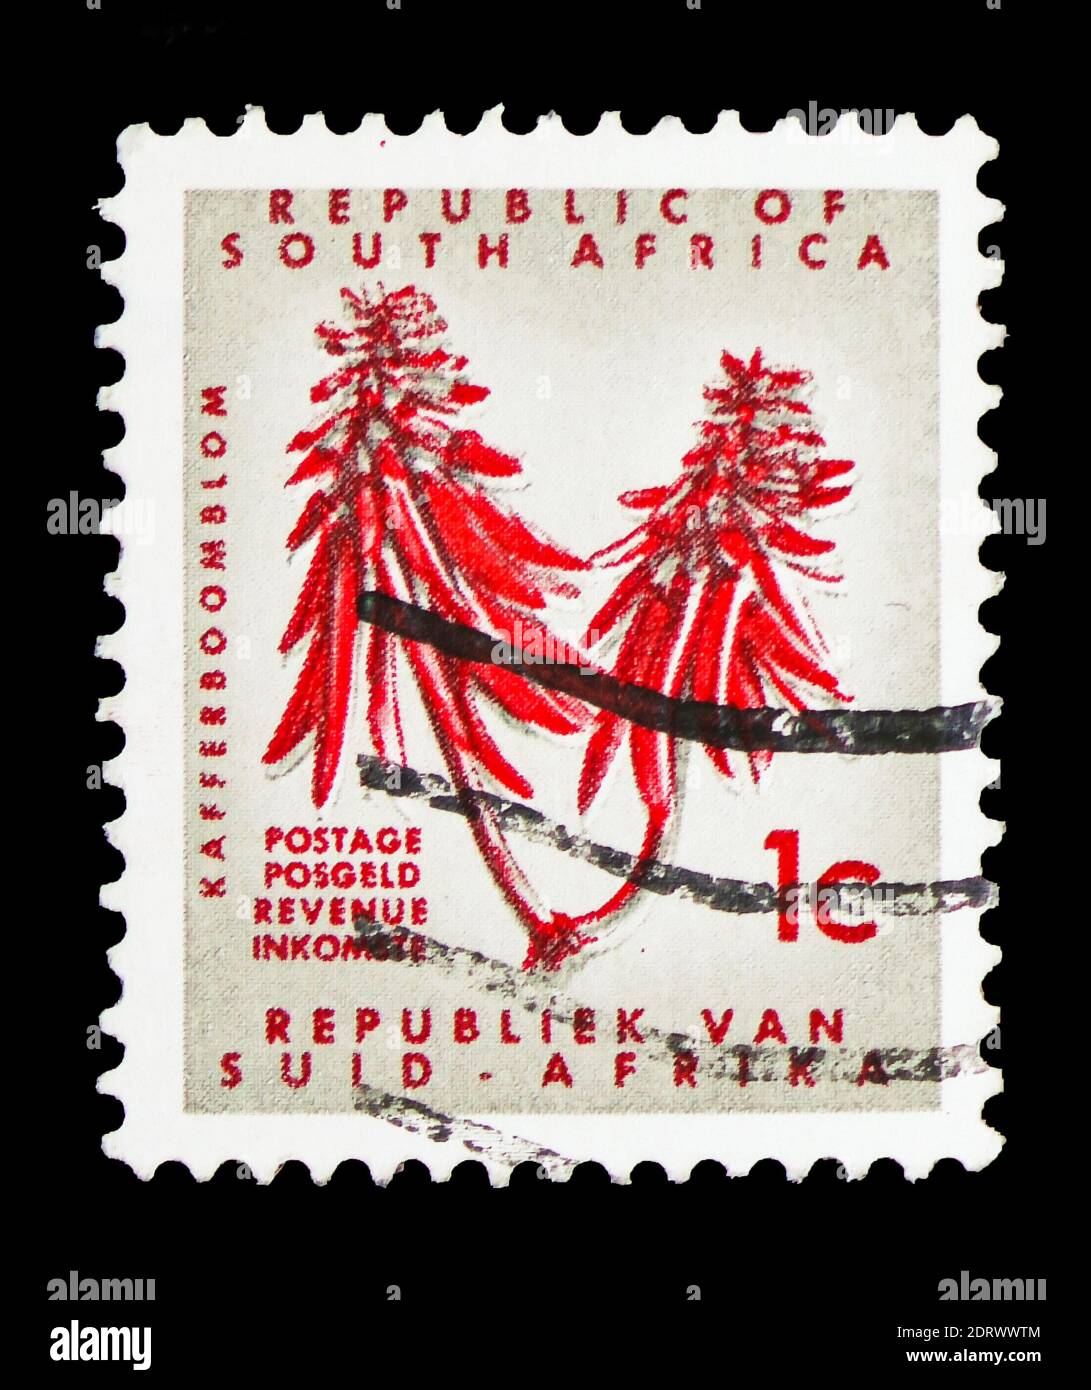 MOSCOW, RUSSIA - FEBRUARY 10, 2019: A stamp printed in South Africa shows Erythrina, Definitive Issue - Decimal Issueserie, circa 1968 Stock Photo